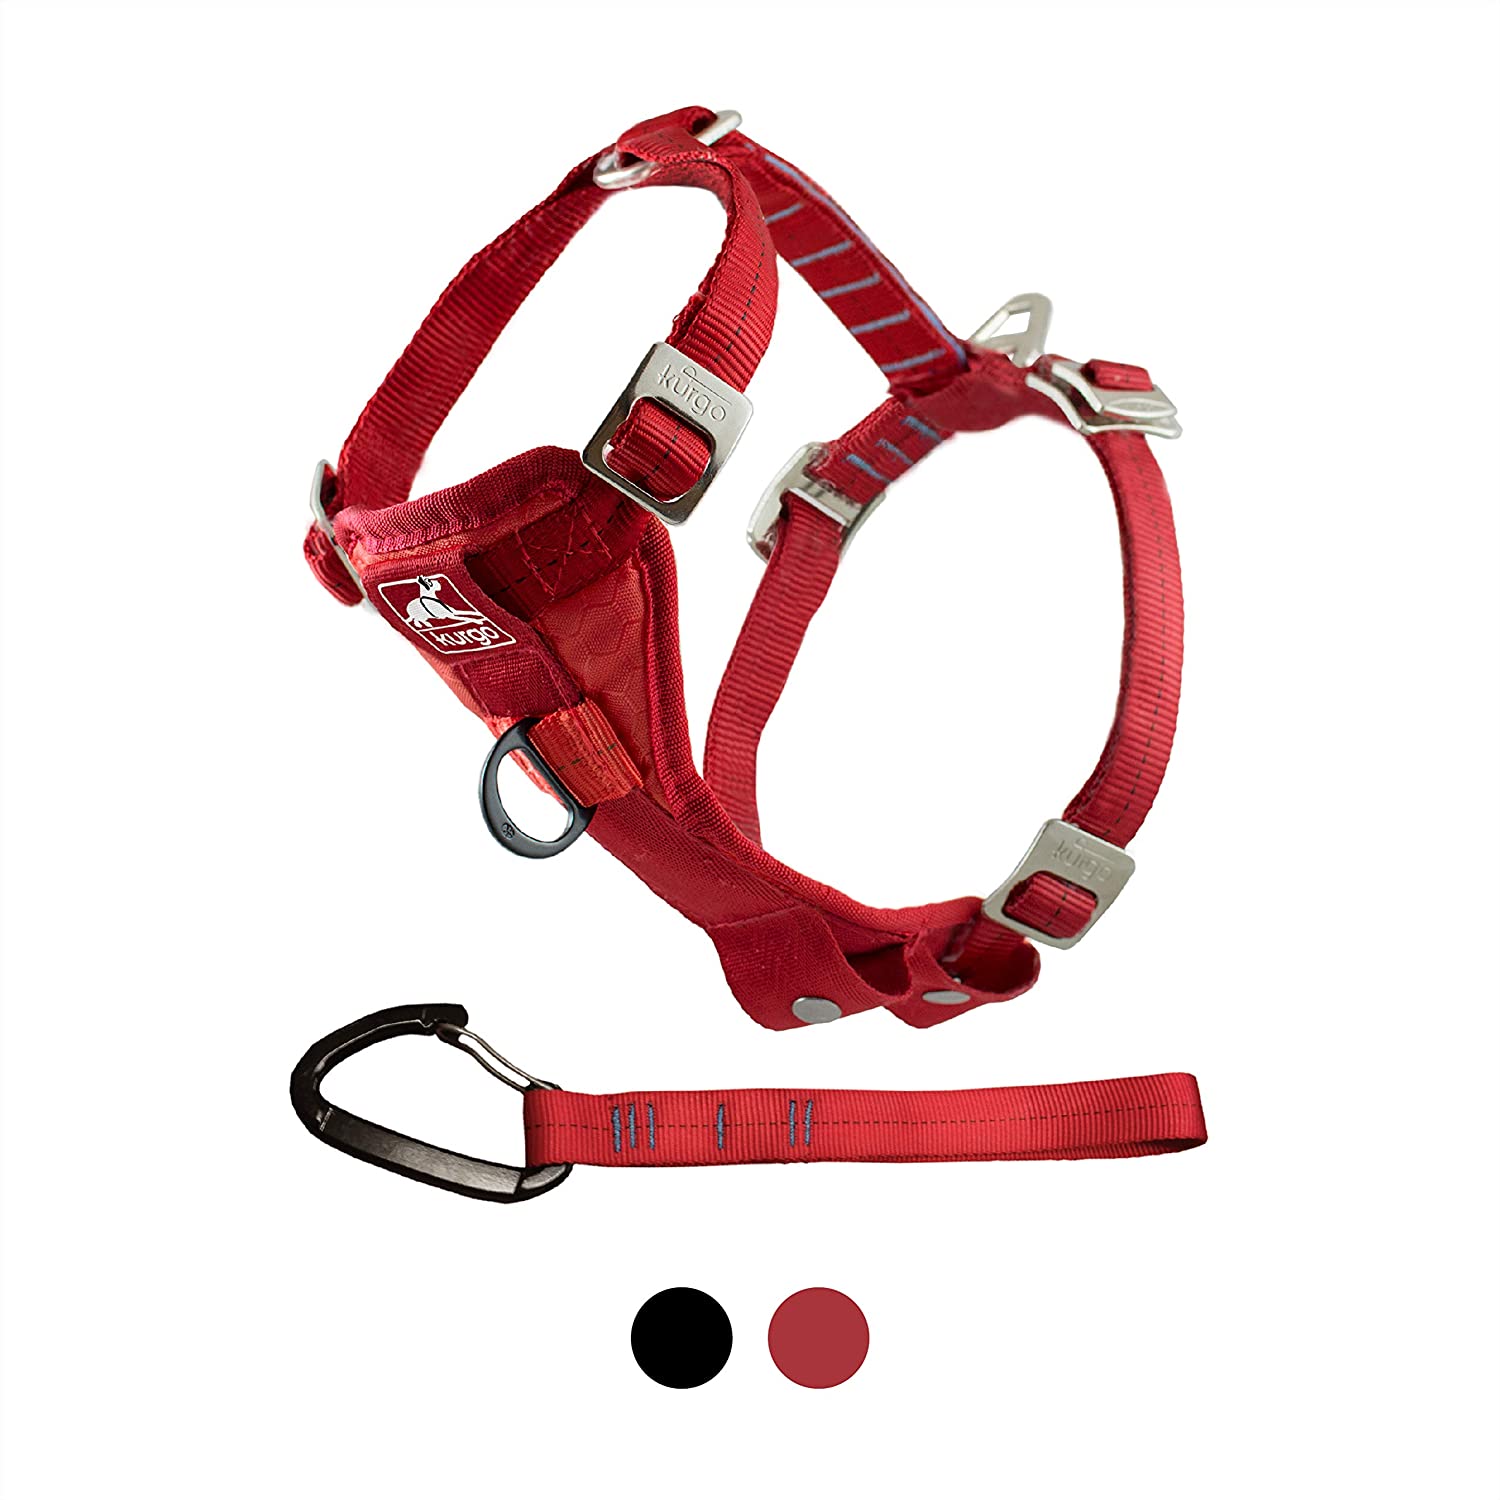 Kurgo Walking And Car Harness For Dogs